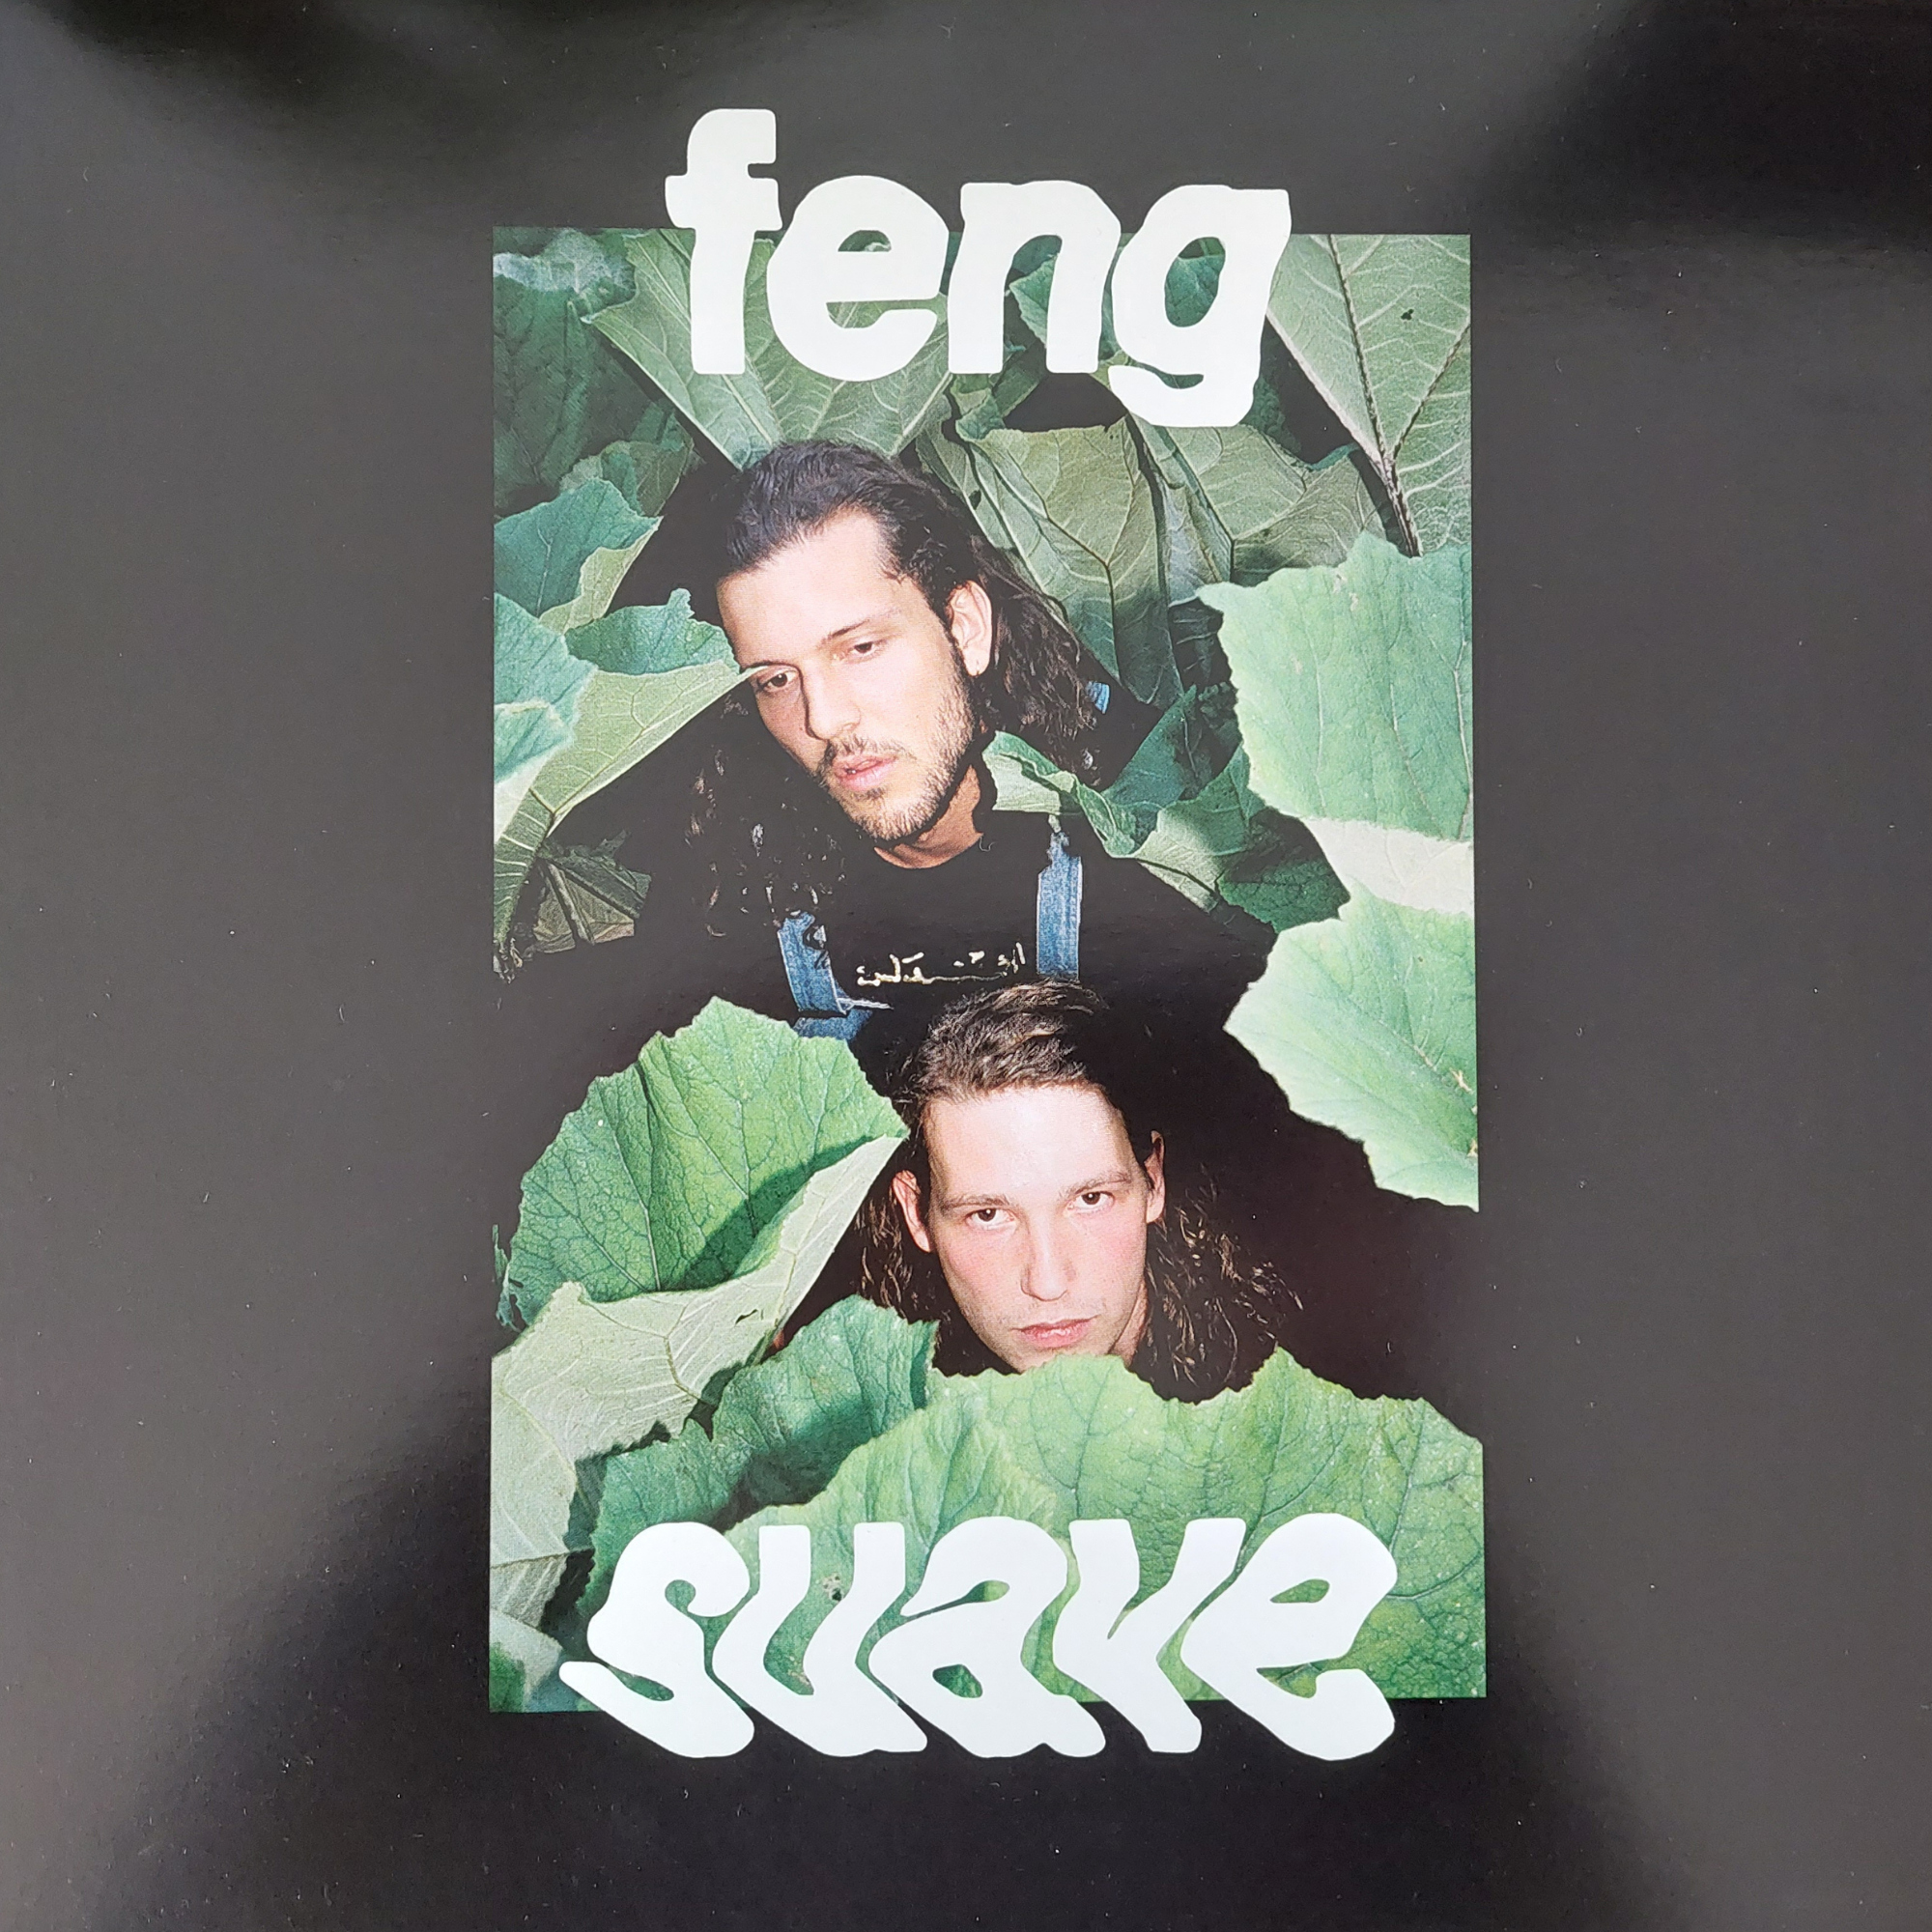 Feng Suave